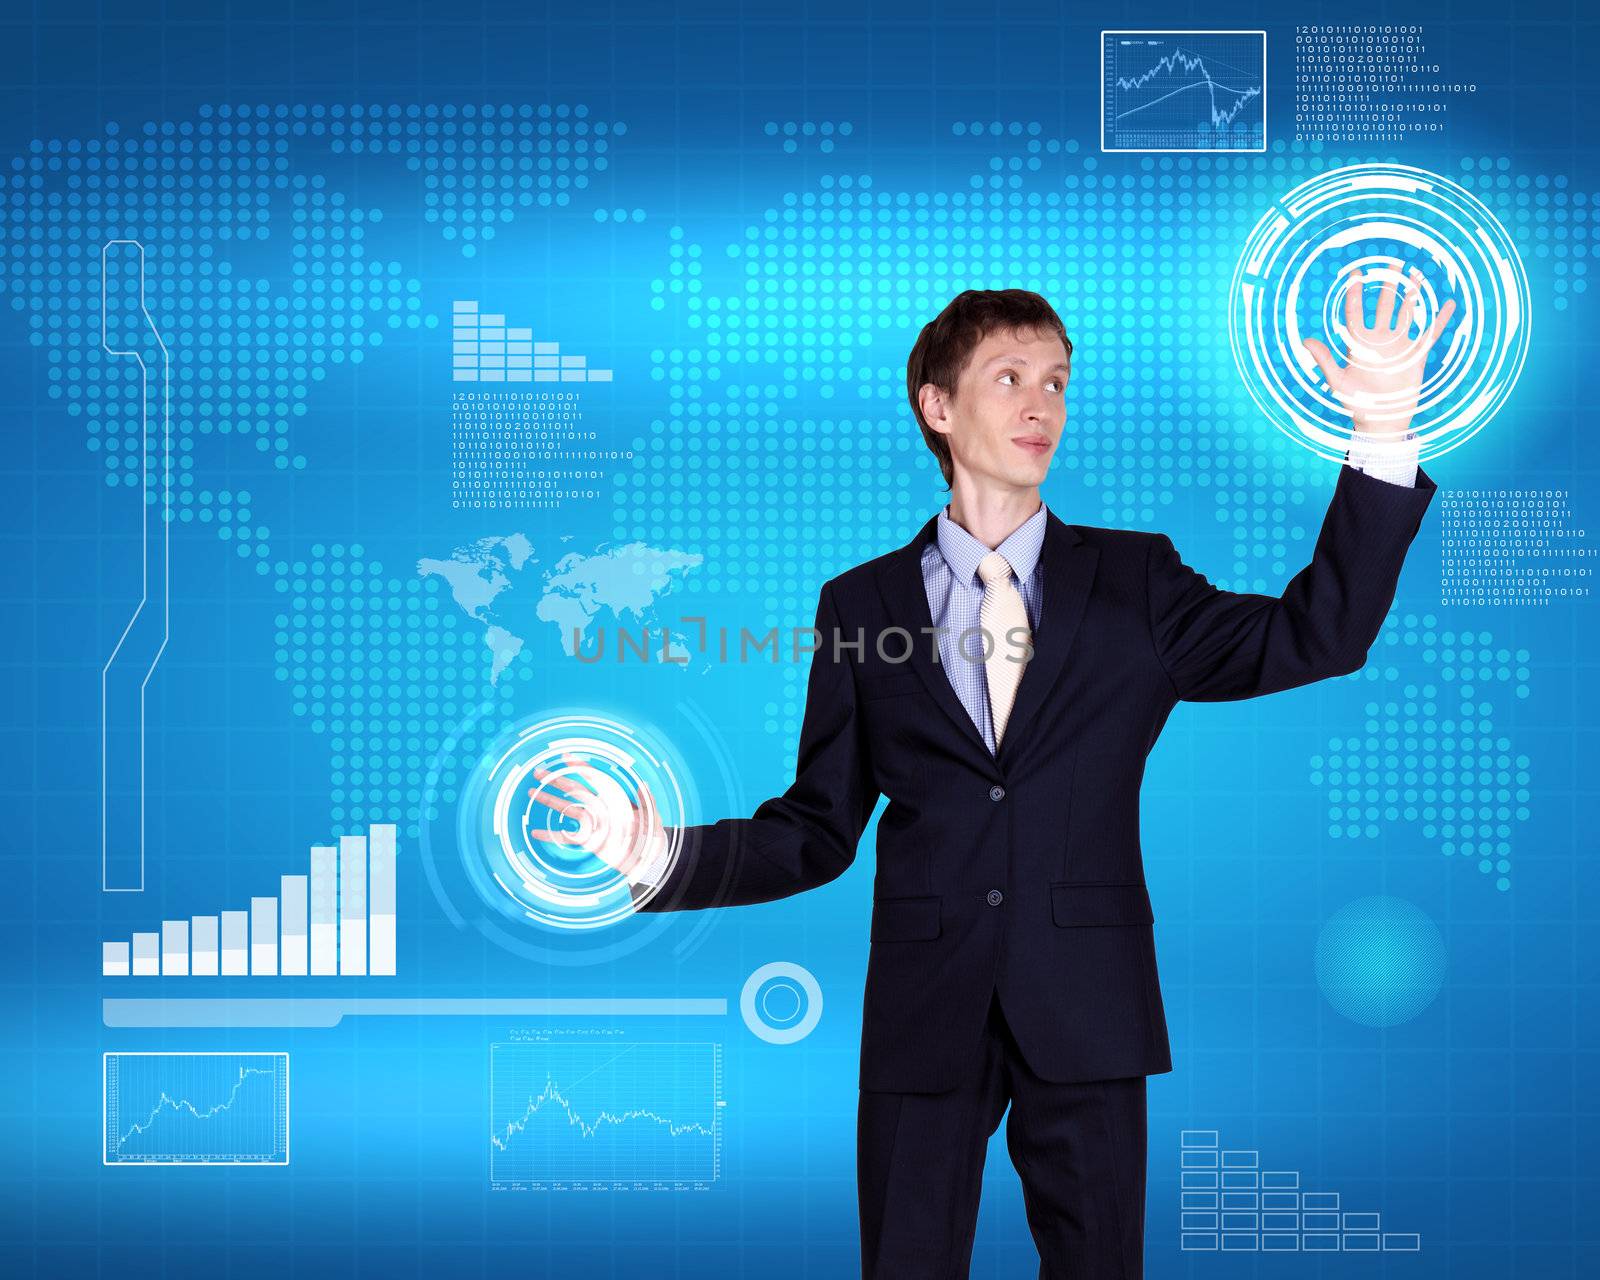 Business person and technology related background by sergey_nivens